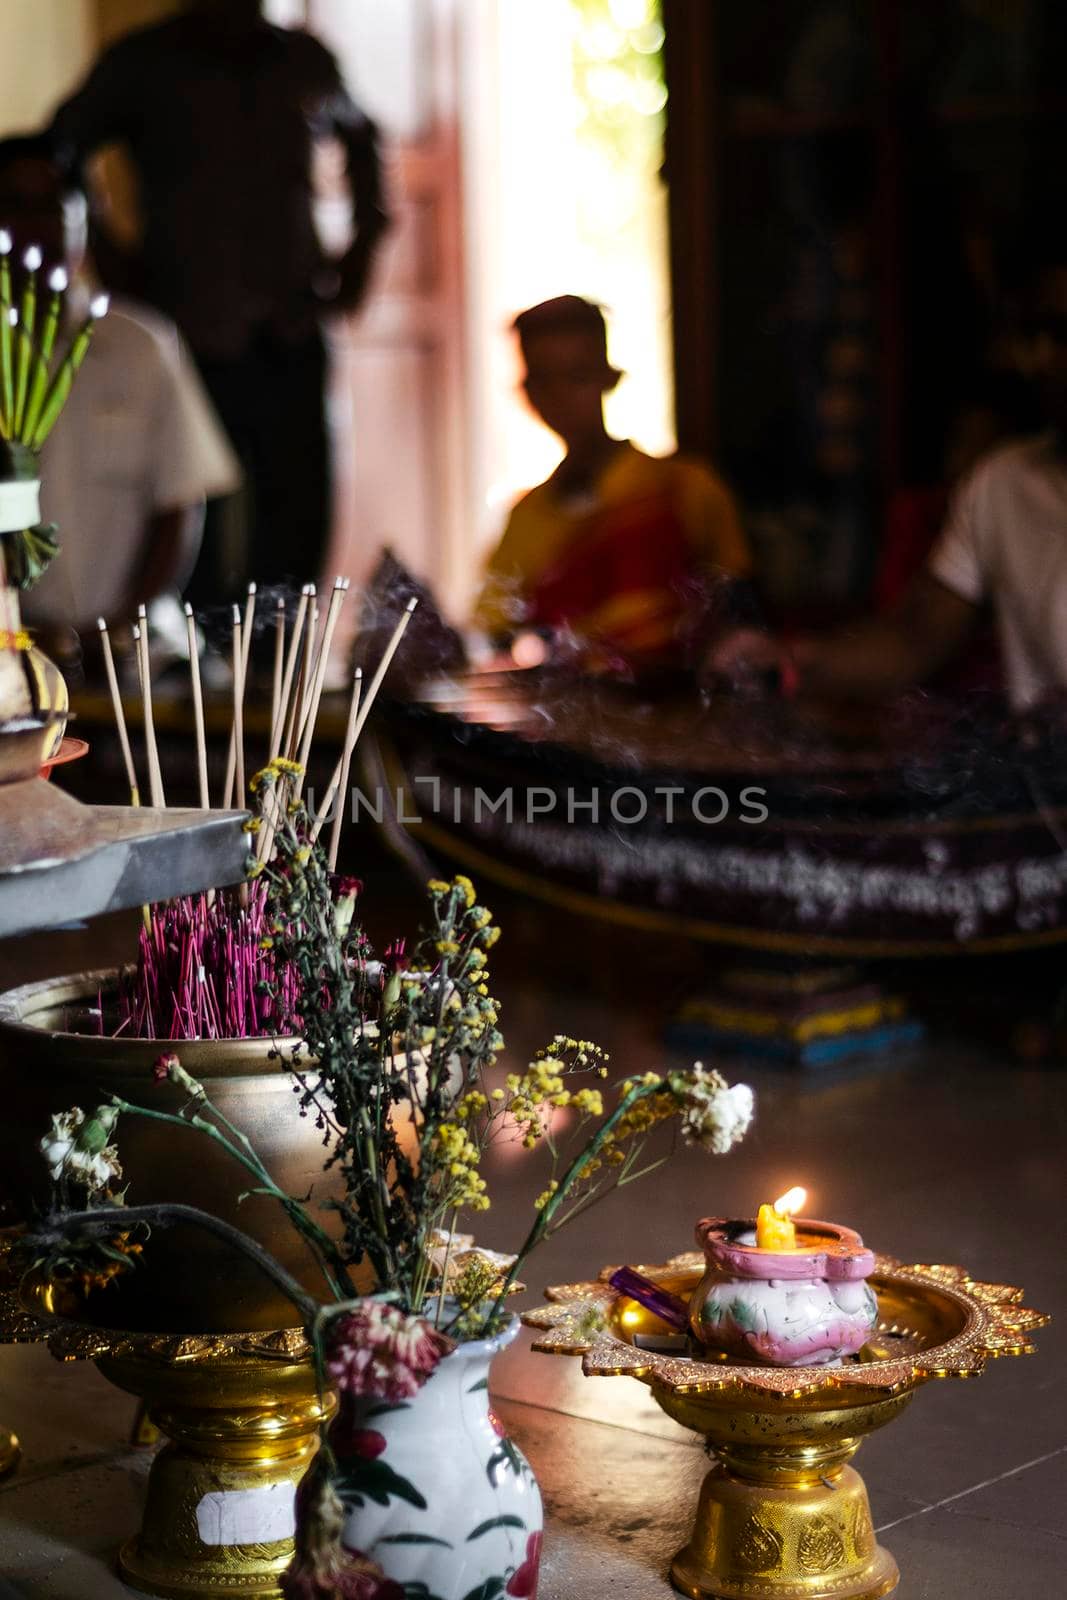 interior shrine detail in buddhist ceremony at temple in cambodia by jackmalipan